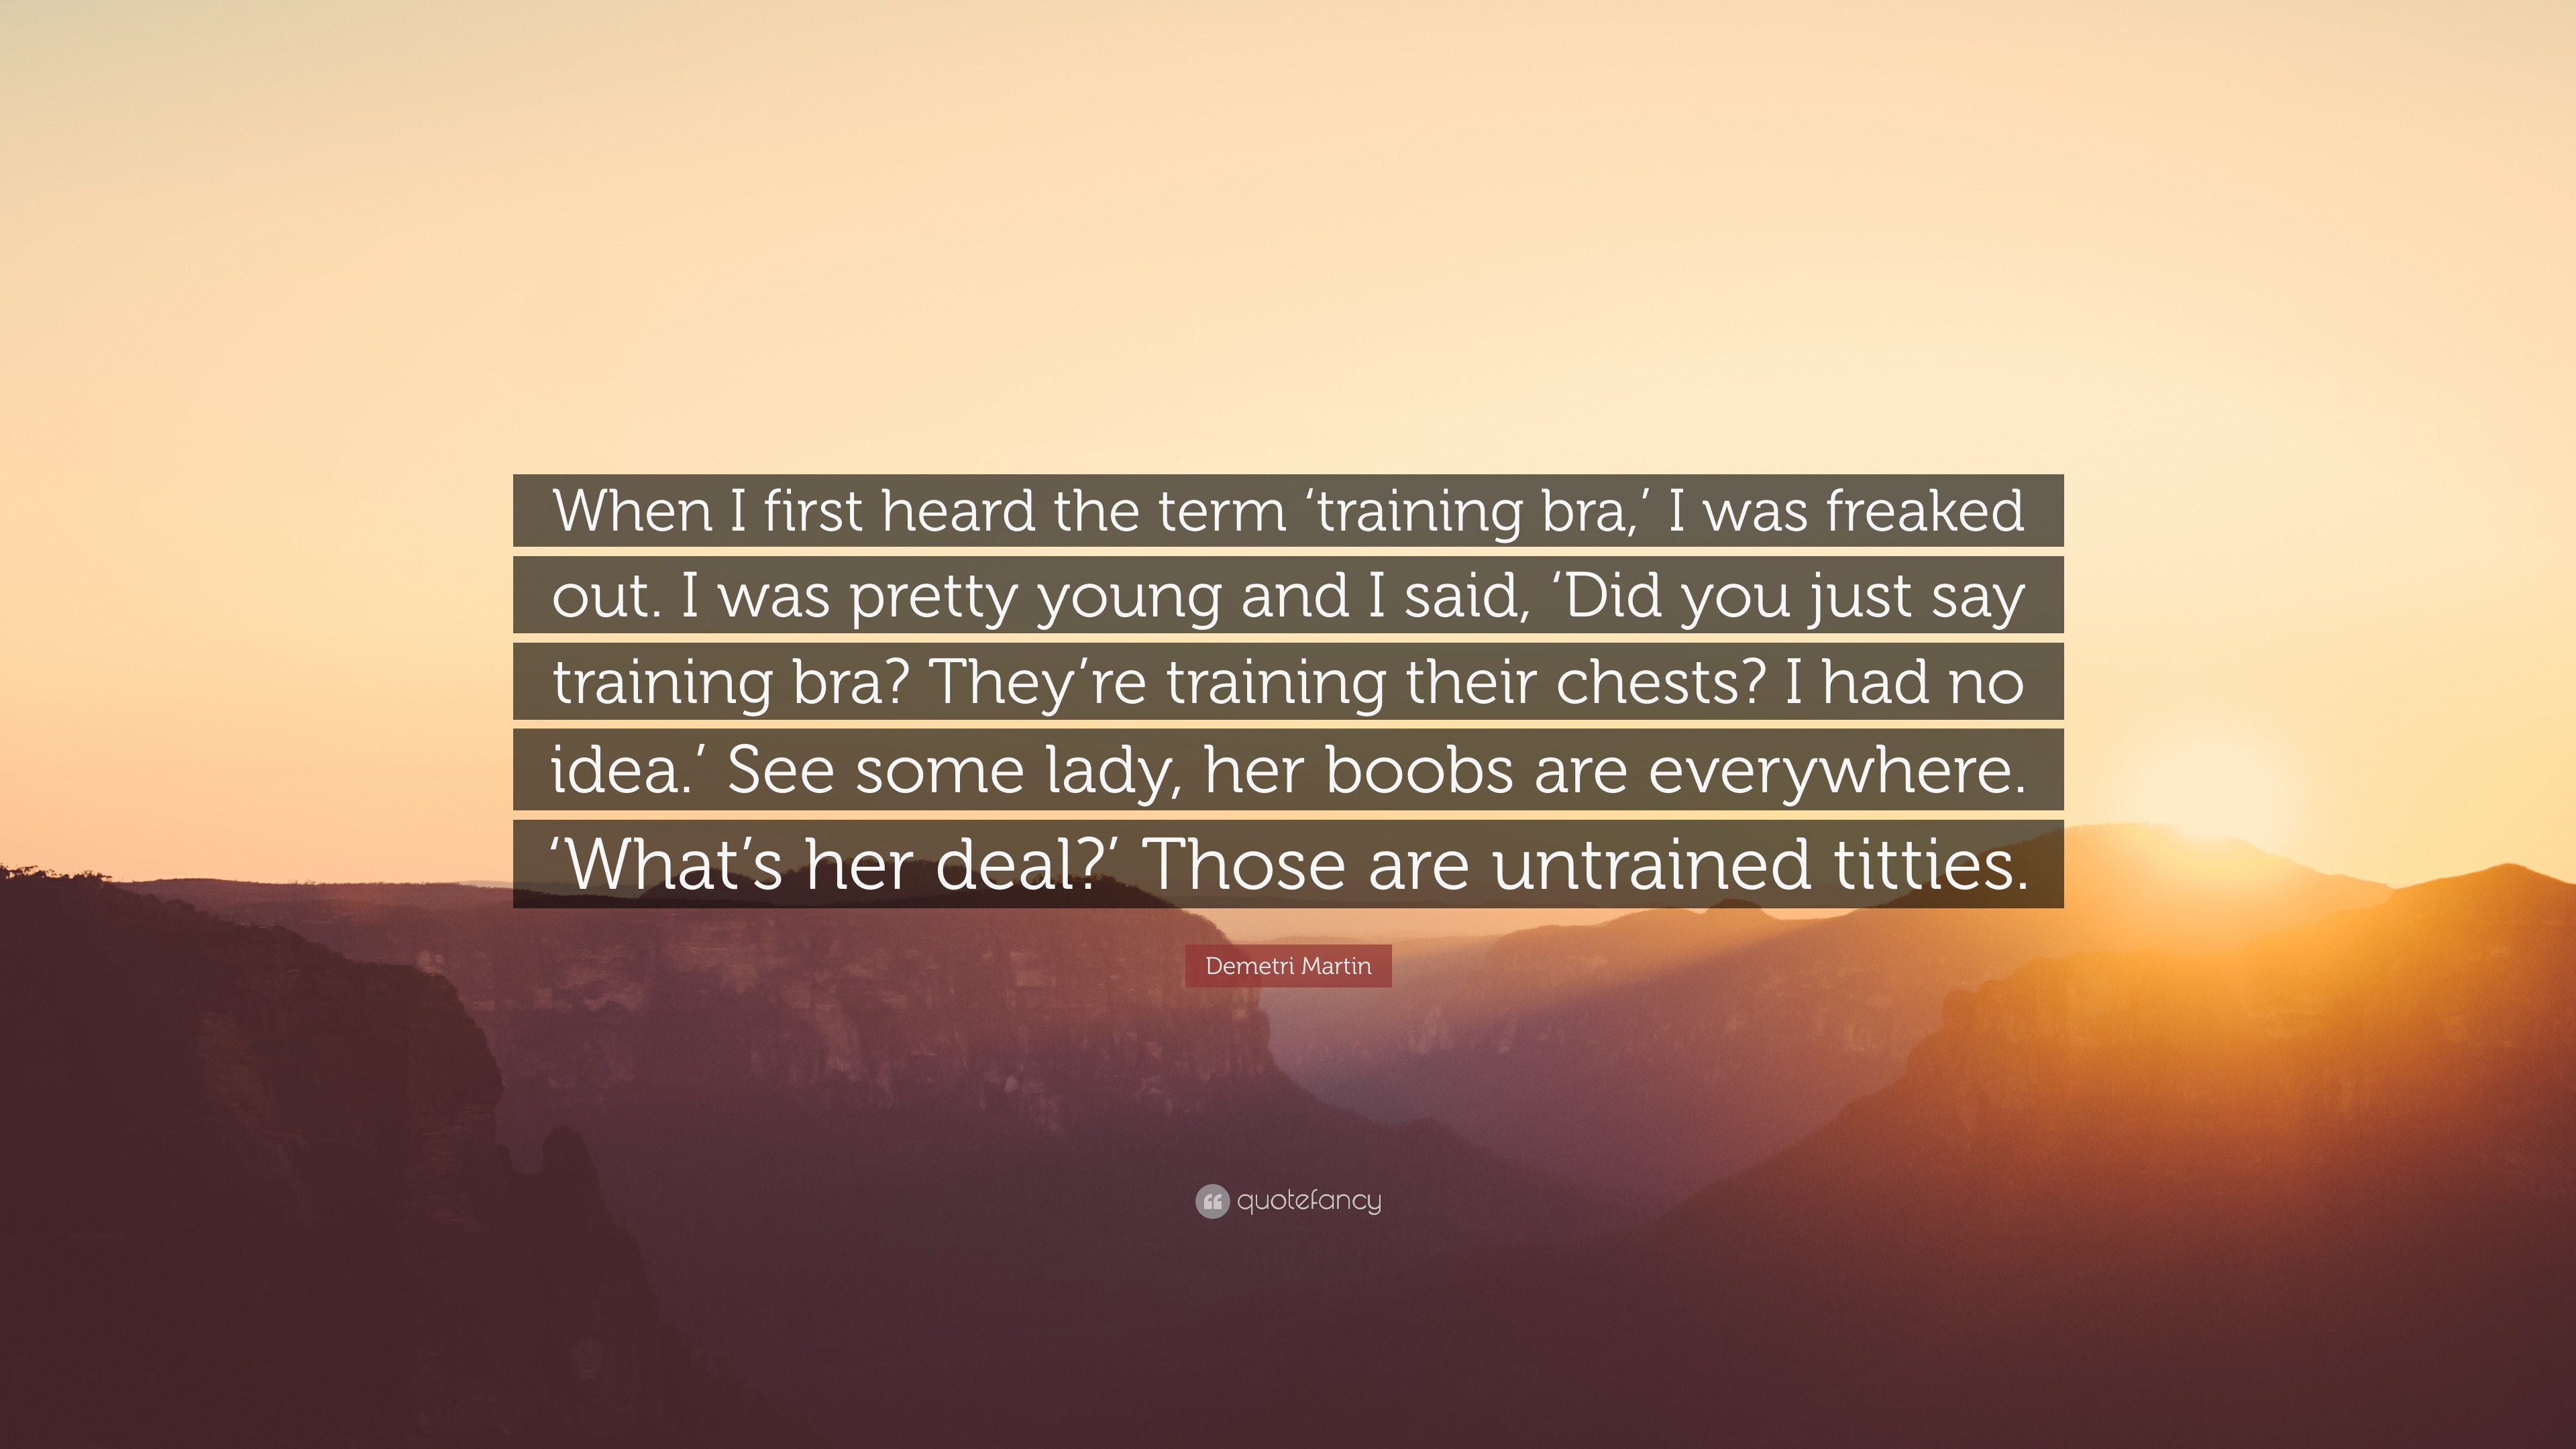 Demetri Martin Quote: “When I first heard the term 'training bra,' I was  freaked out. I was pretty young and I said, 'Did you just say training”